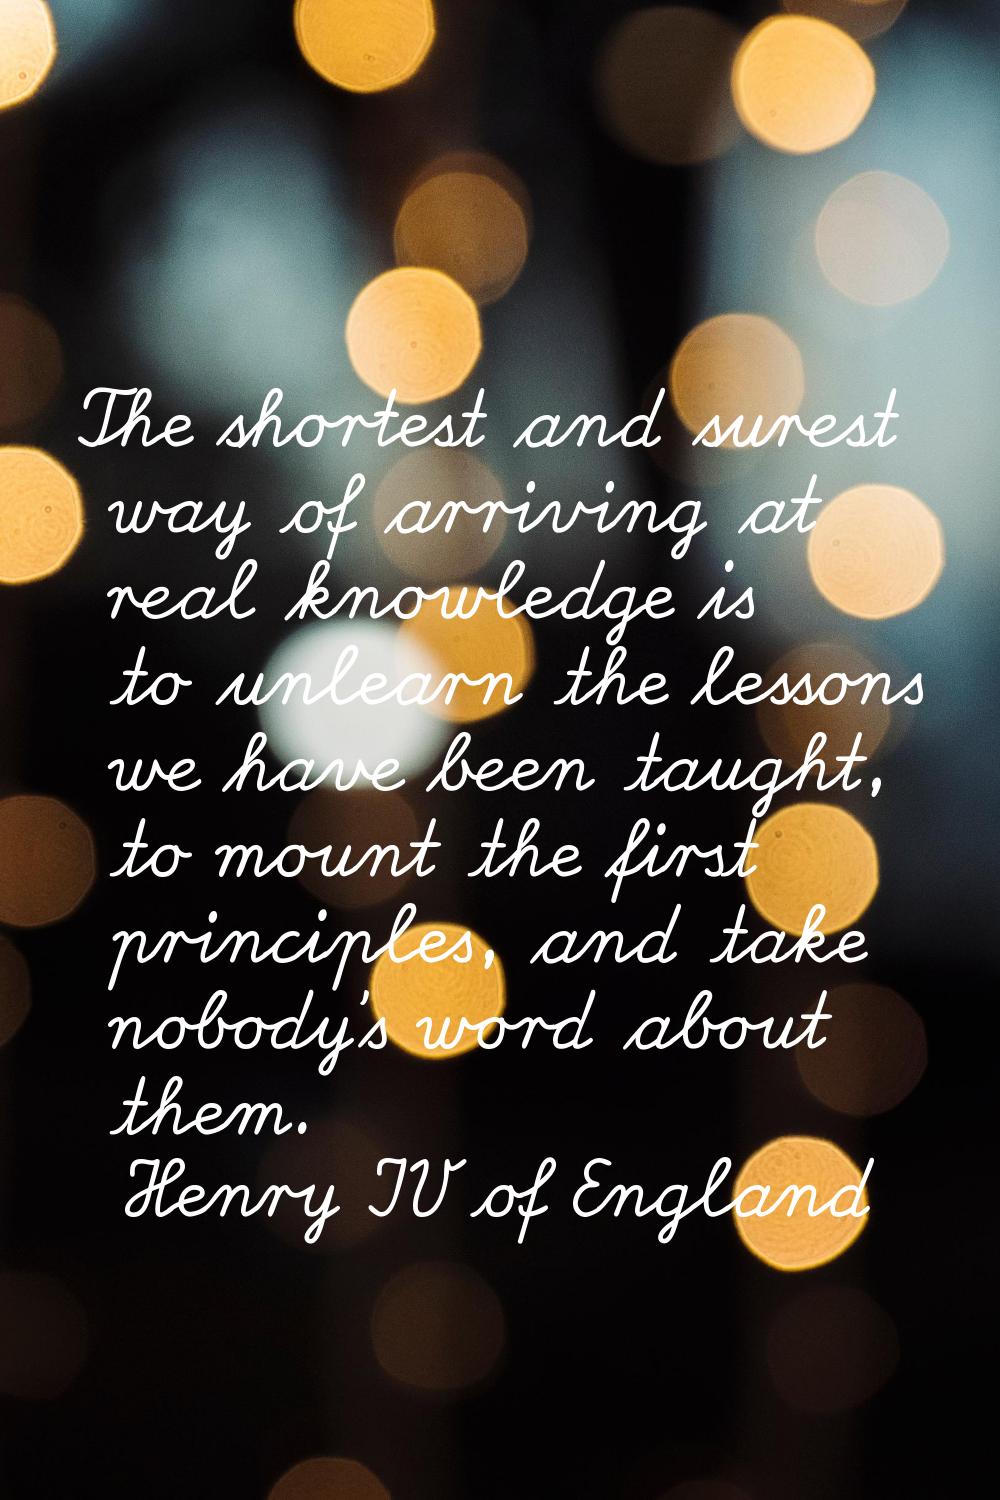 The shortest and surest way of arriving at real knowledge is to unlearn the lessons we have been ta